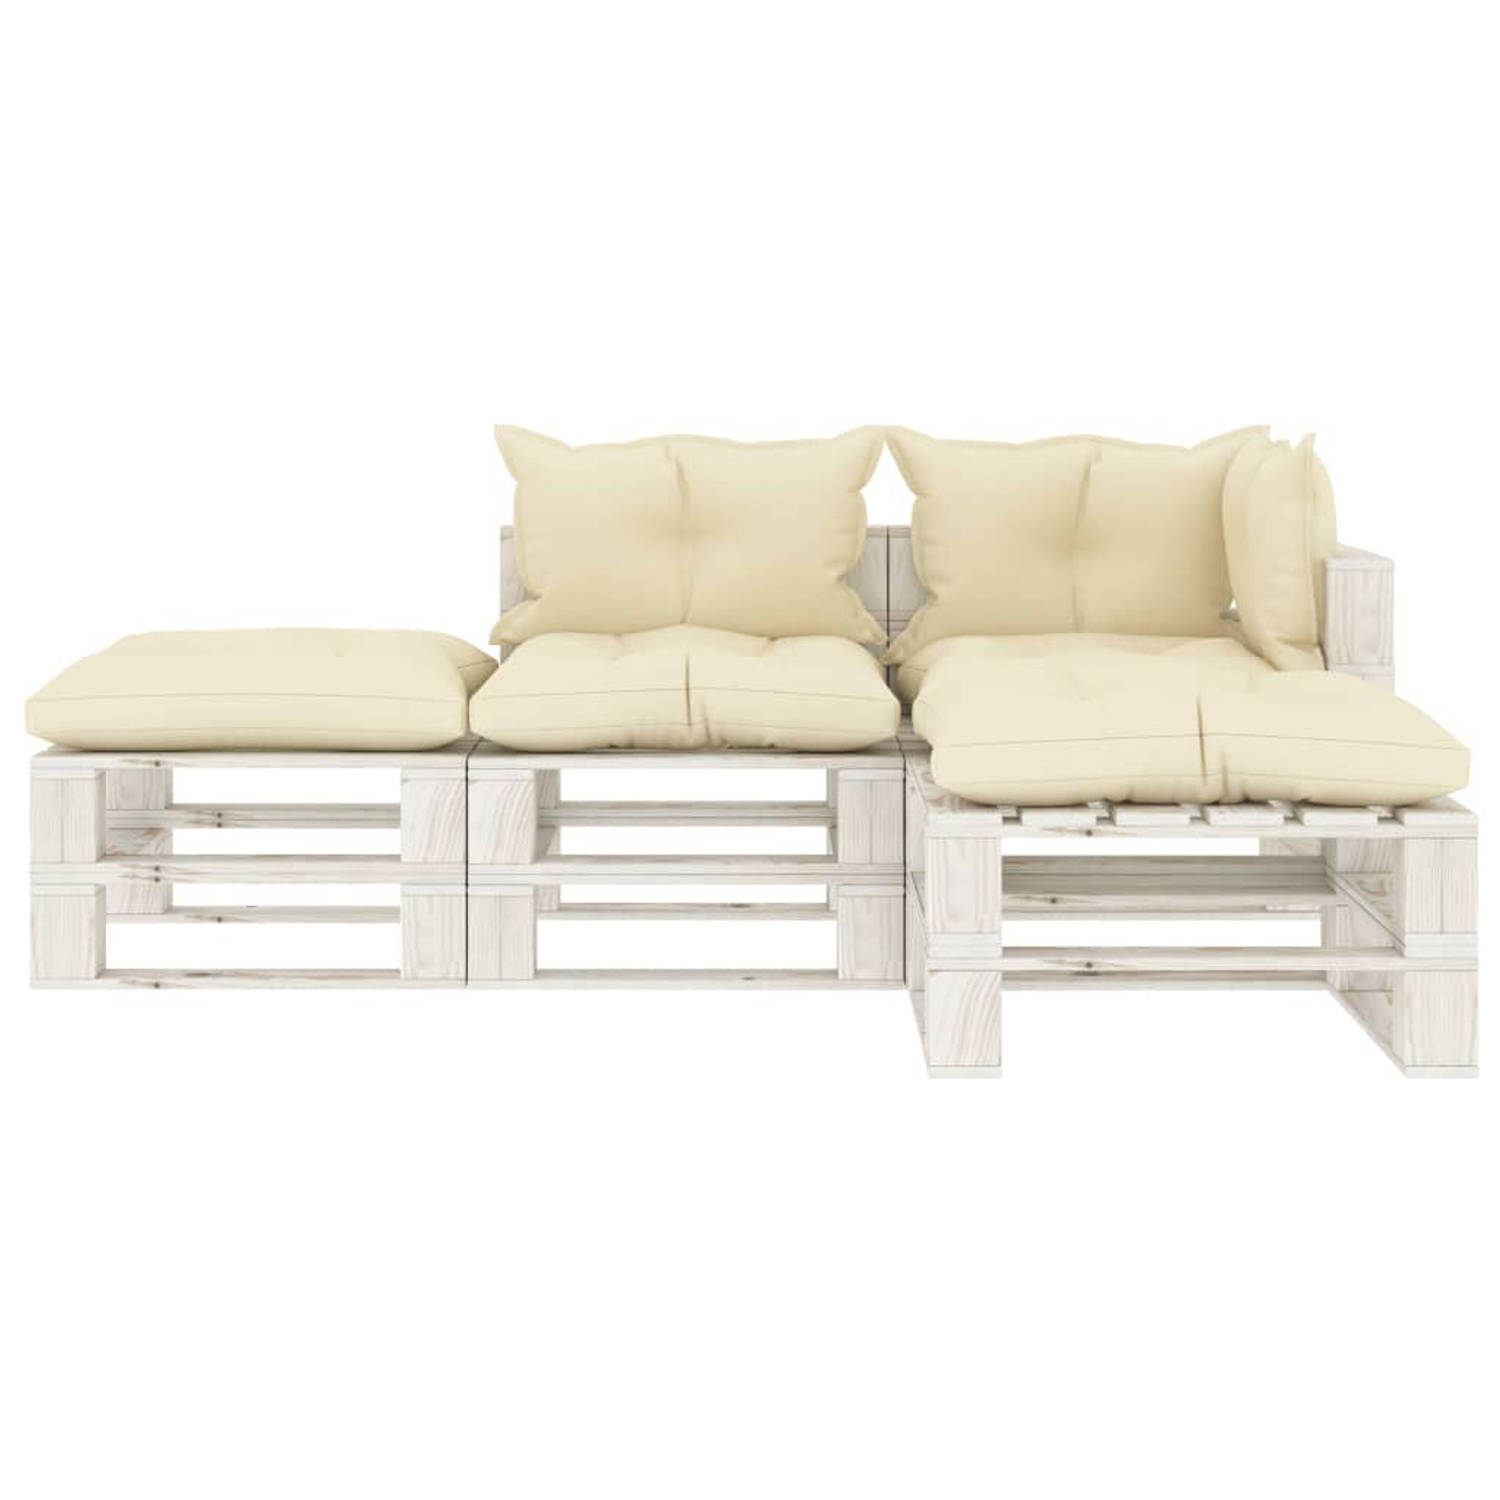 The Living Store Loungeset - Pallet - Tuinmeubelset - 70 x 67.5 x 60.8 cm - Grenenhout